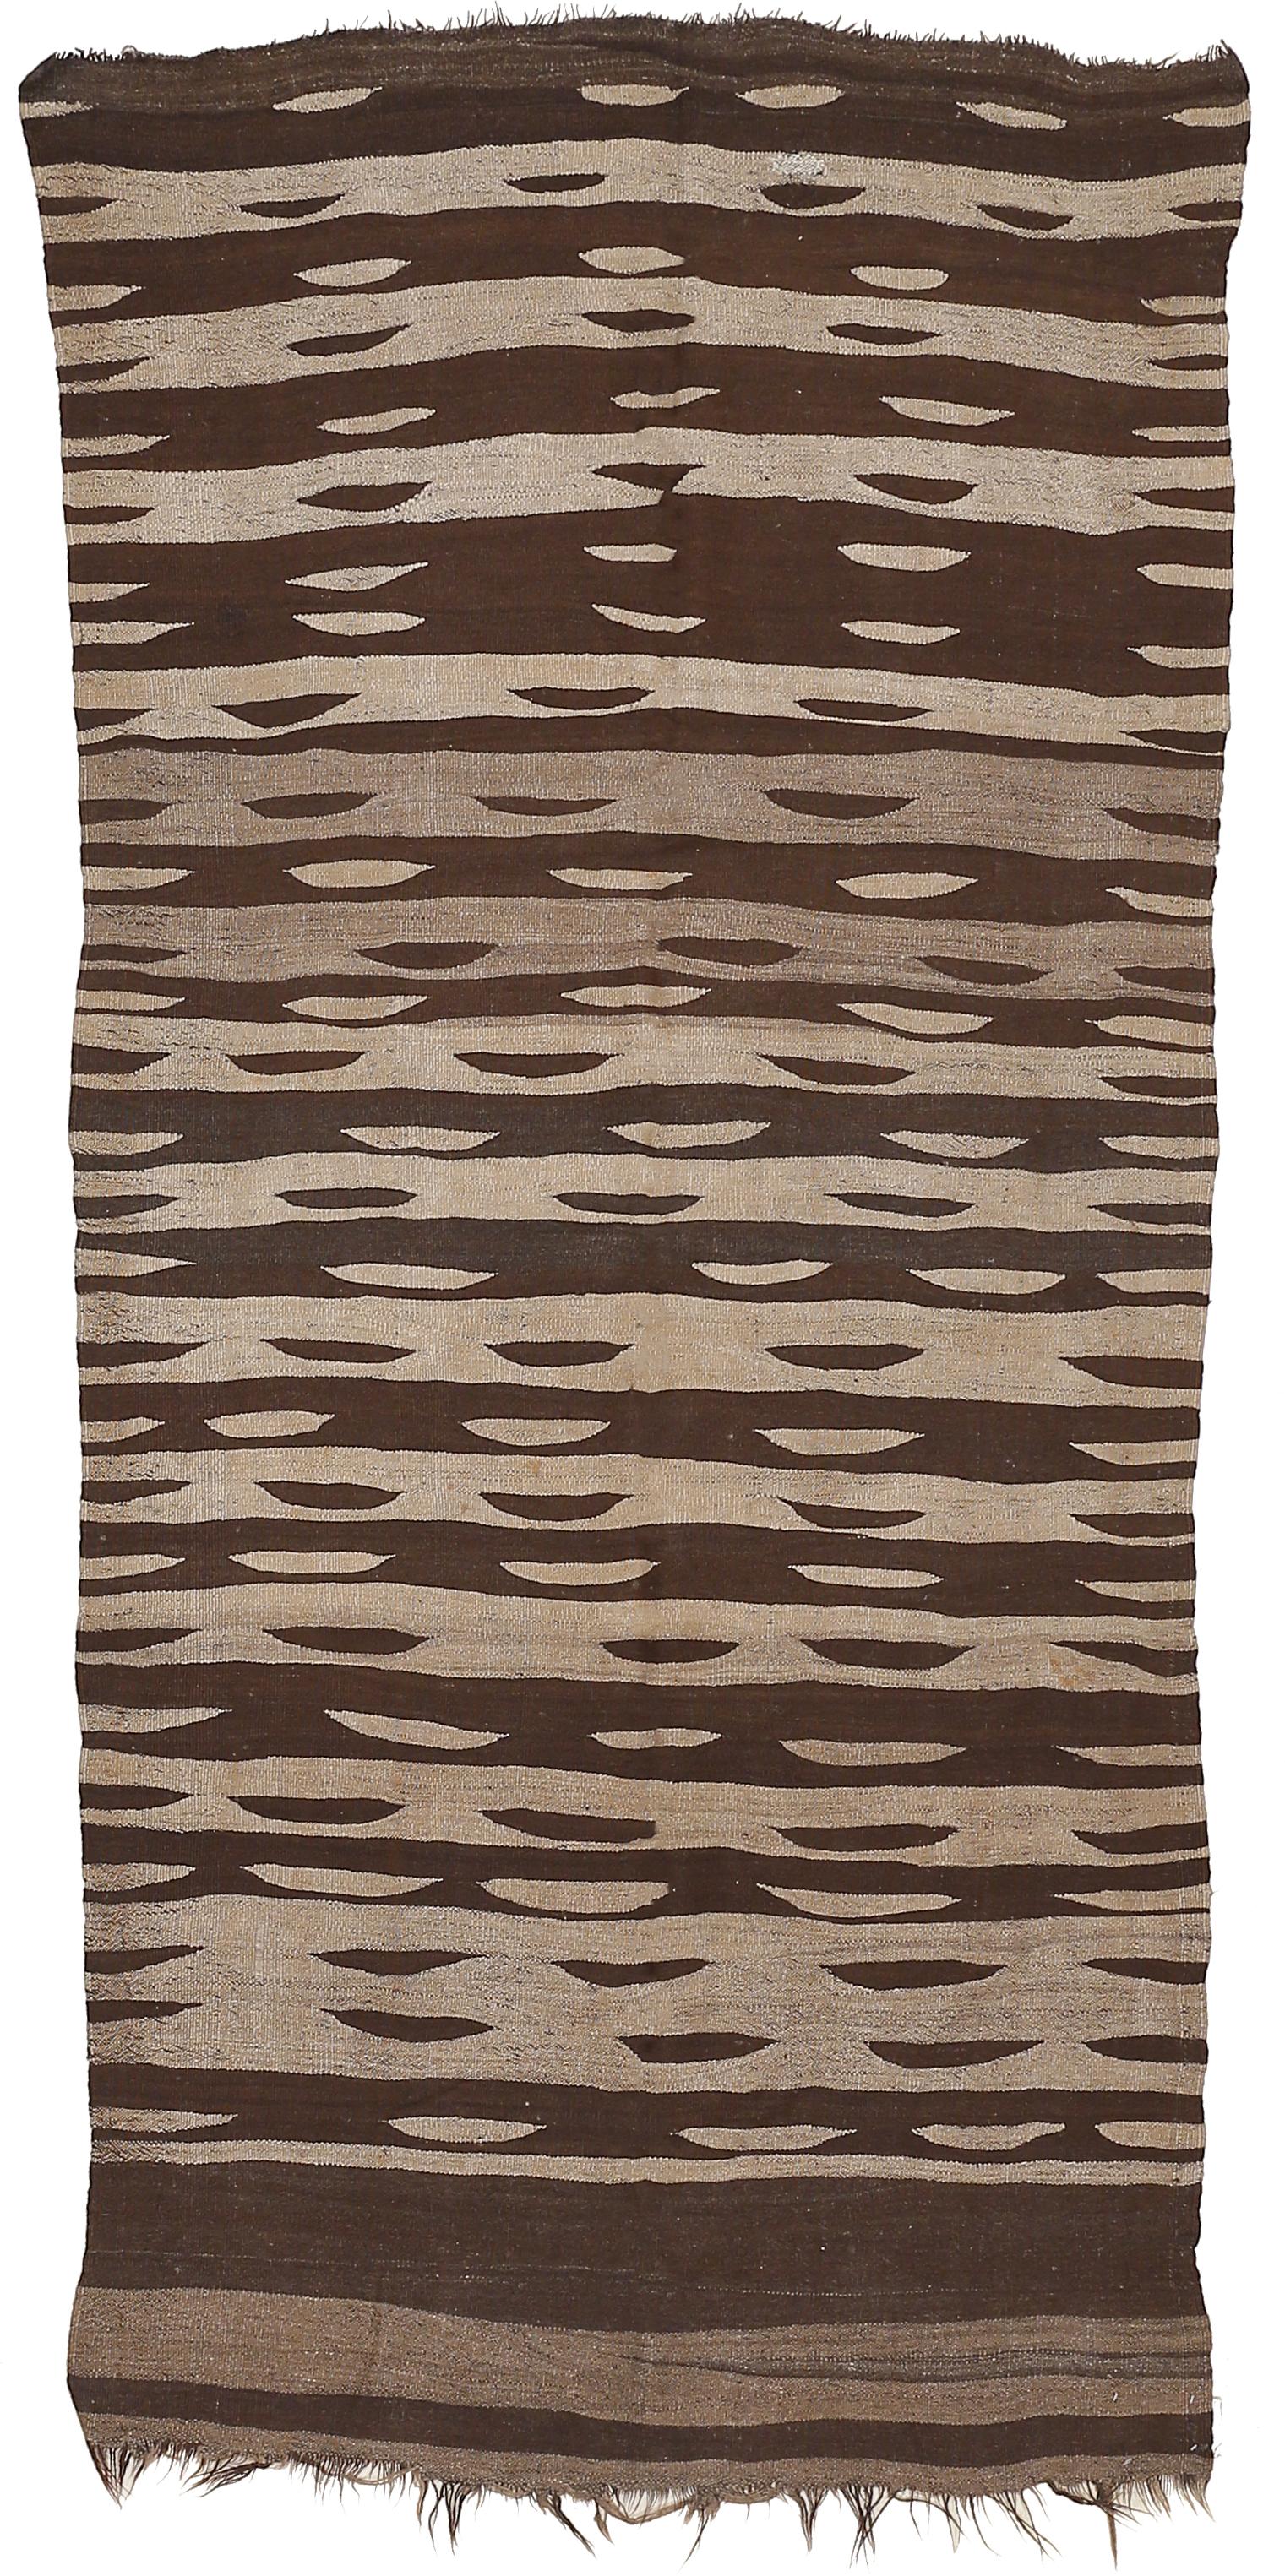 A rare and beautiful flat-weave from the Ourika valley, located in the Moroccan High Atlas, distinguished by a mocha palette obtained from natural, undyed wools, and by a repeat pattern of 'eyes' in contrasting colors.